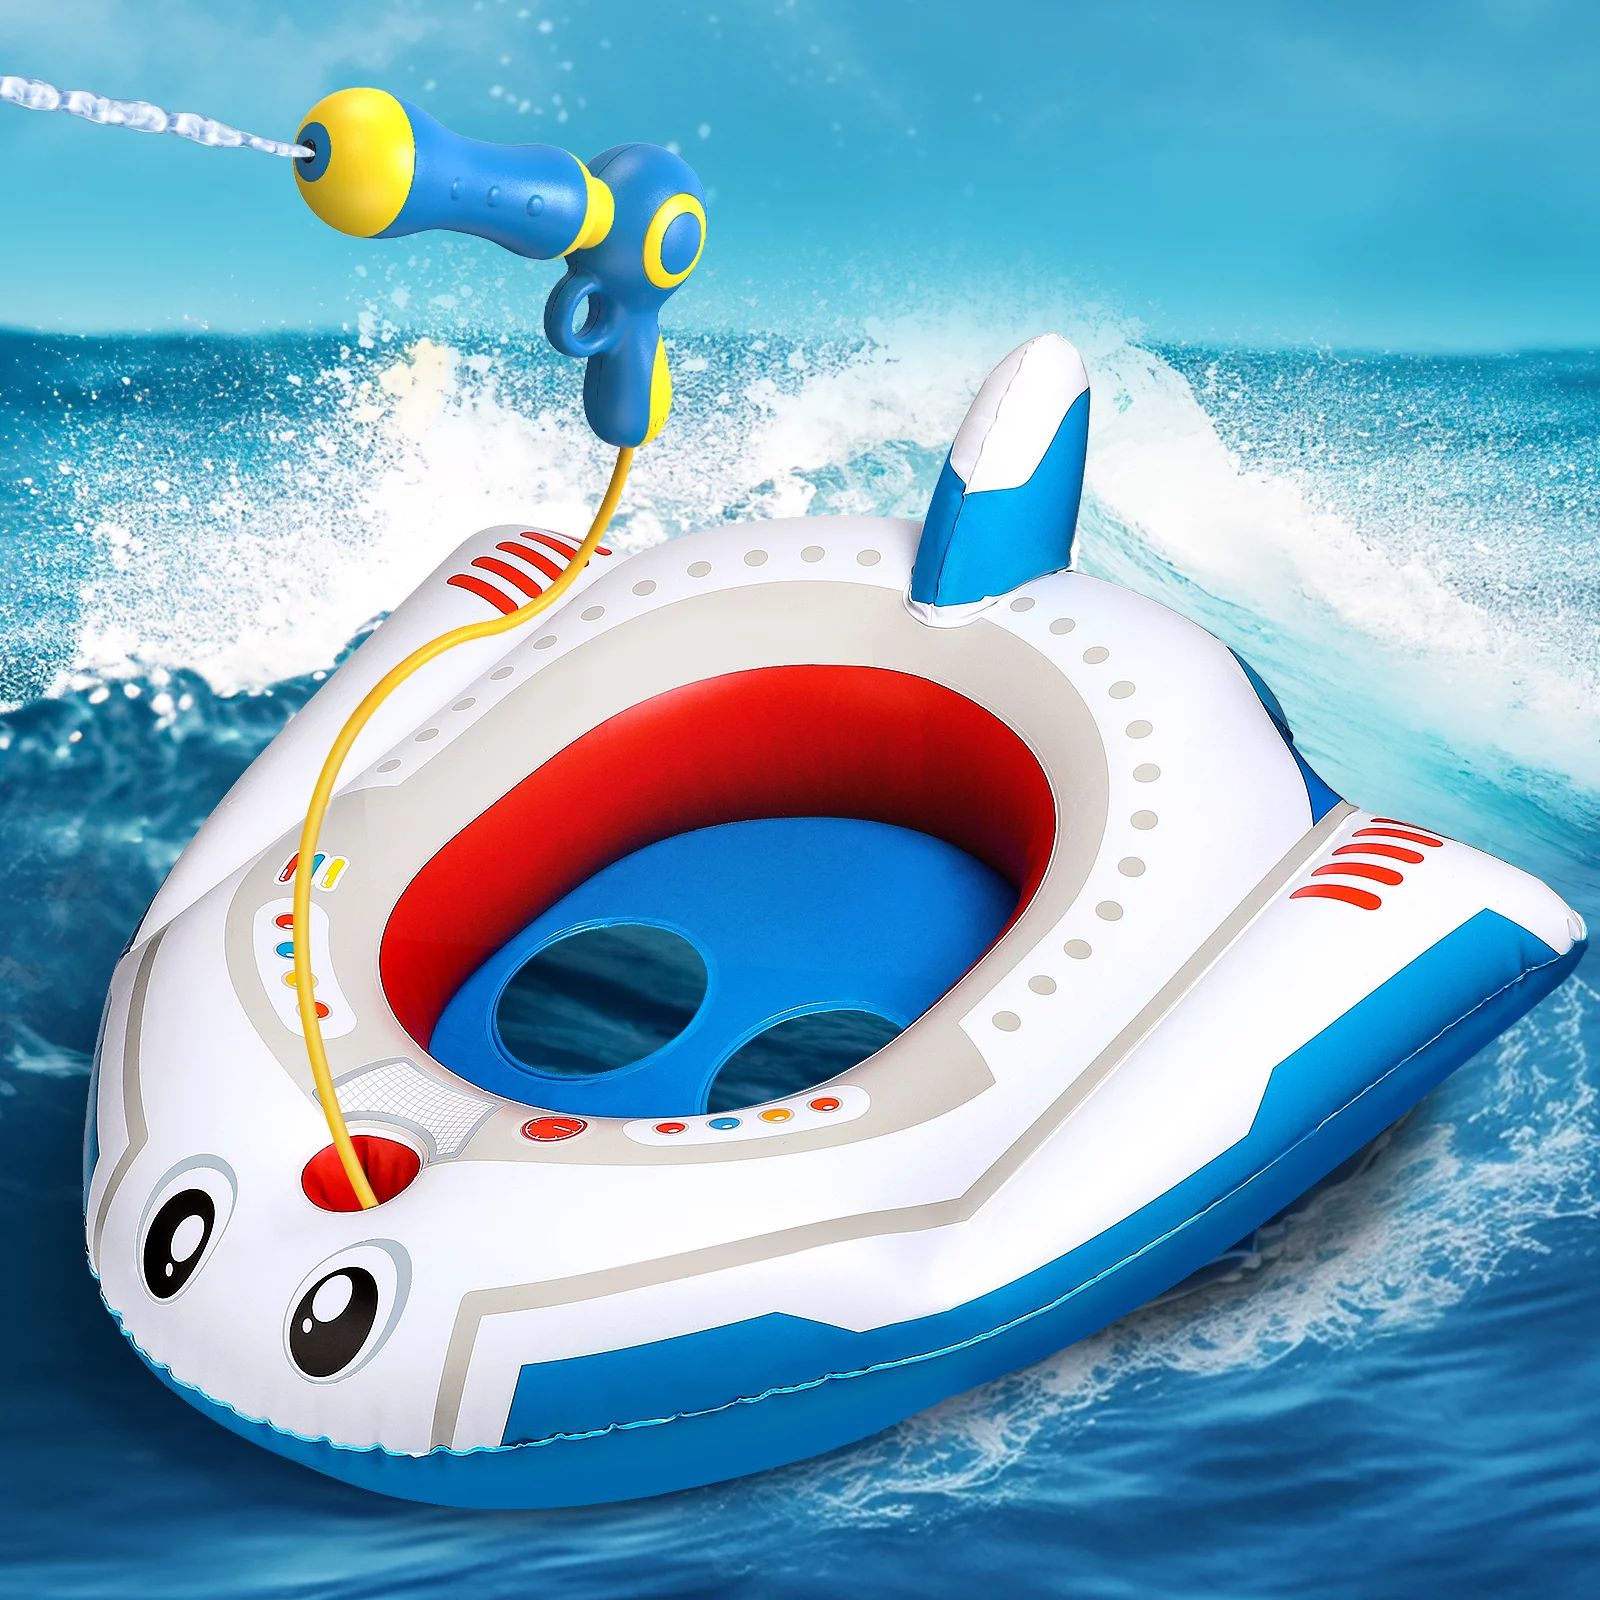 Hot Bee Inflatable Swimming Pool Floats for Kids with Squirt Gun, Ride-on Space Boat, Summer Toys... | Walmart (US)